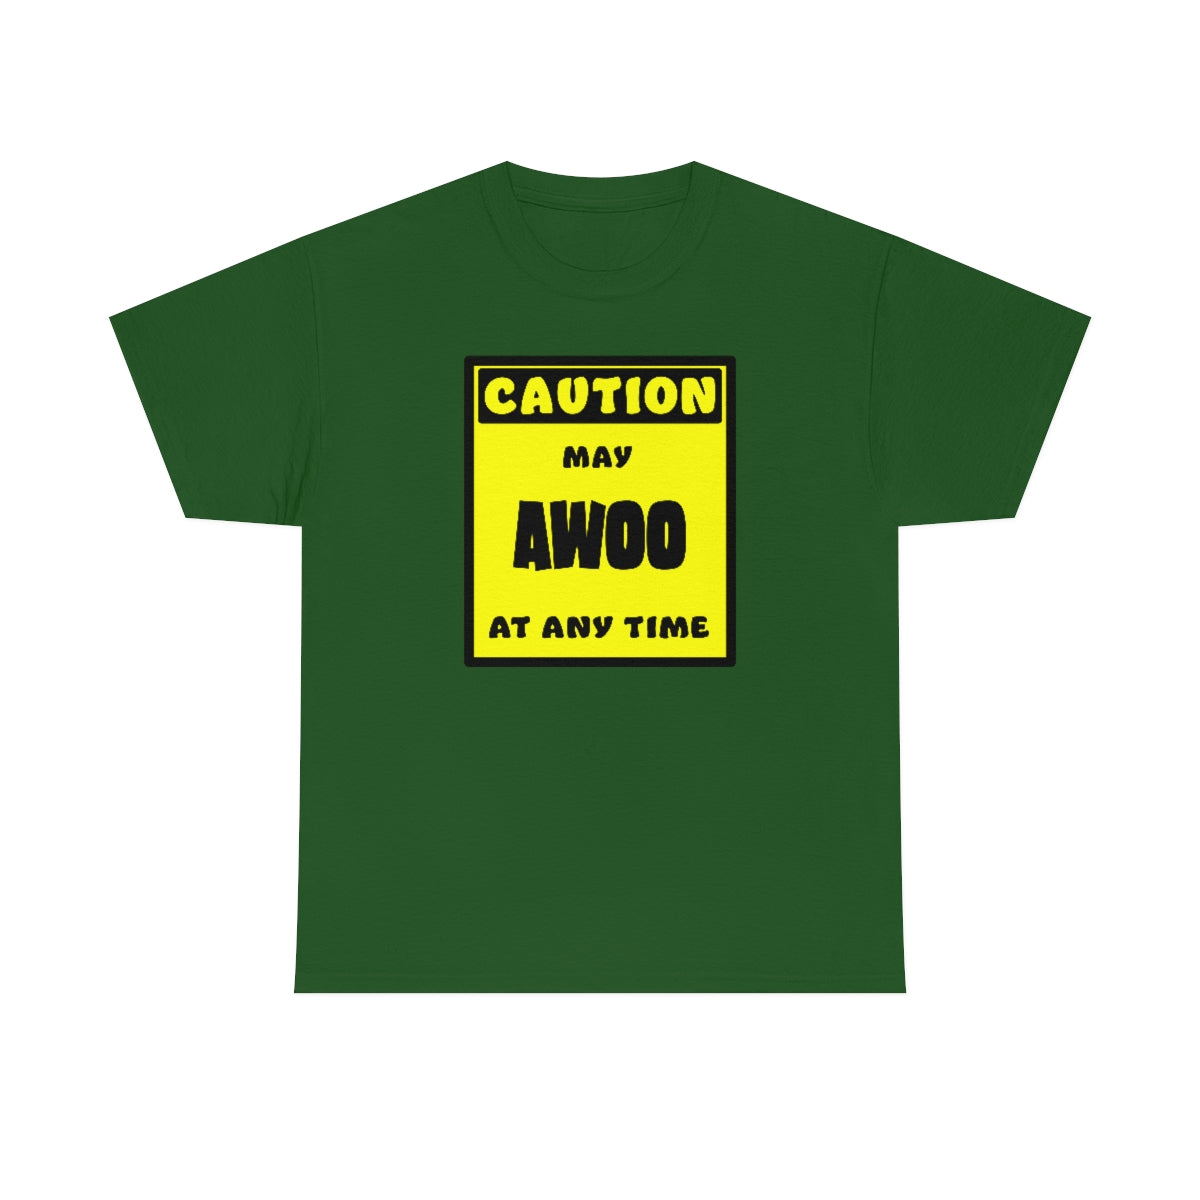 CAUTION! May AWOO at any time! - T-Shirt T-Shirt AFLT-Whootorca Green S 